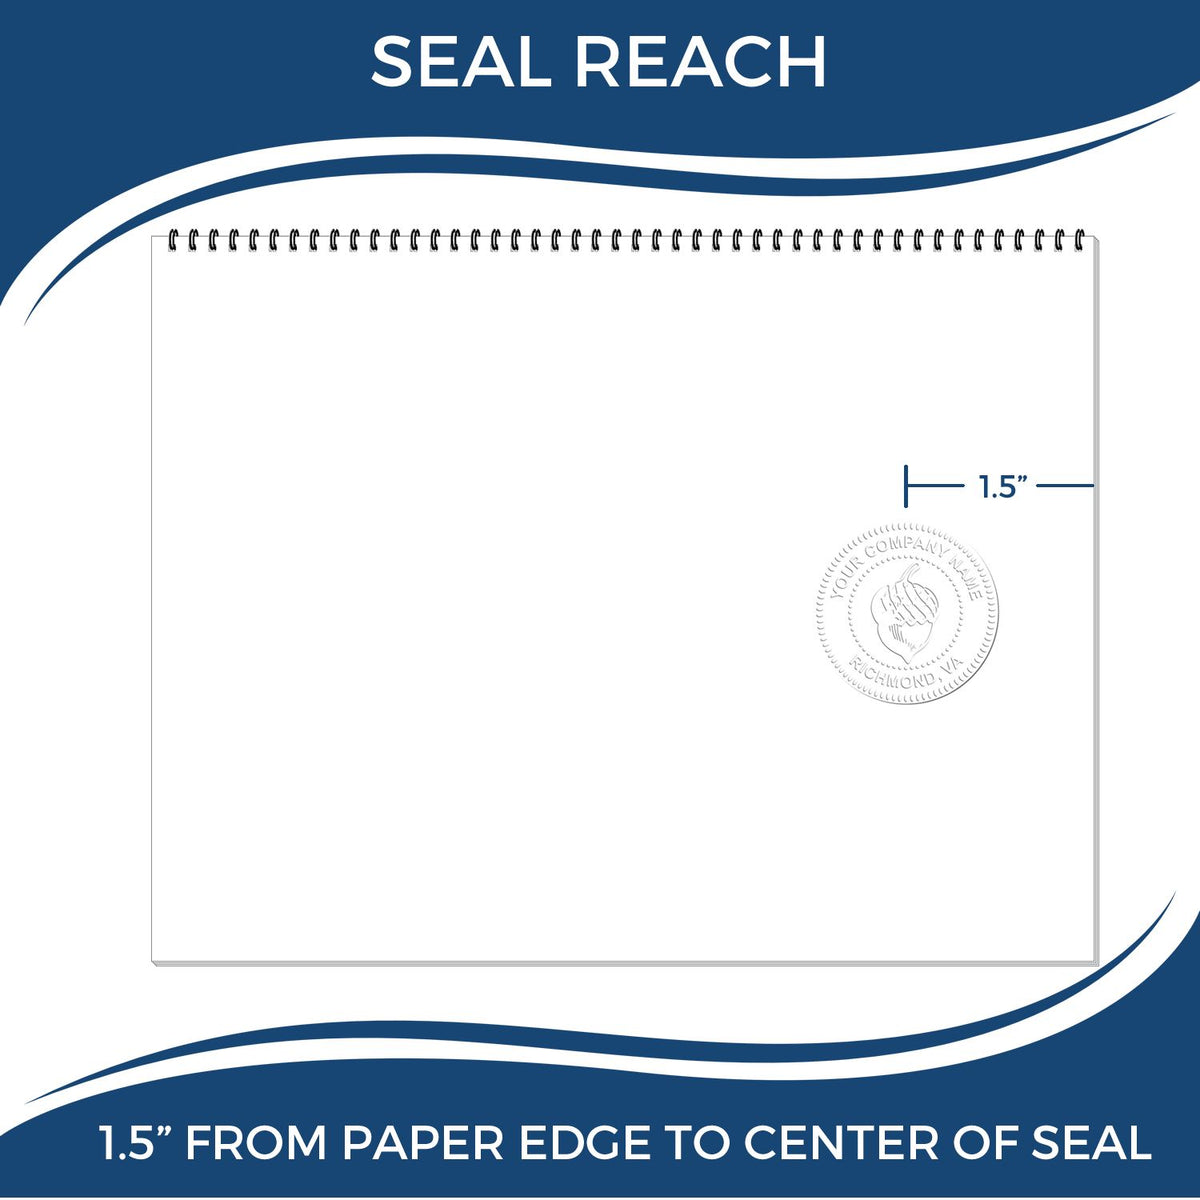 An infographic showing the seal reach which is represented by a ruler and a miniature seal image of the Gift District of Columbia Landscape Architect Seal